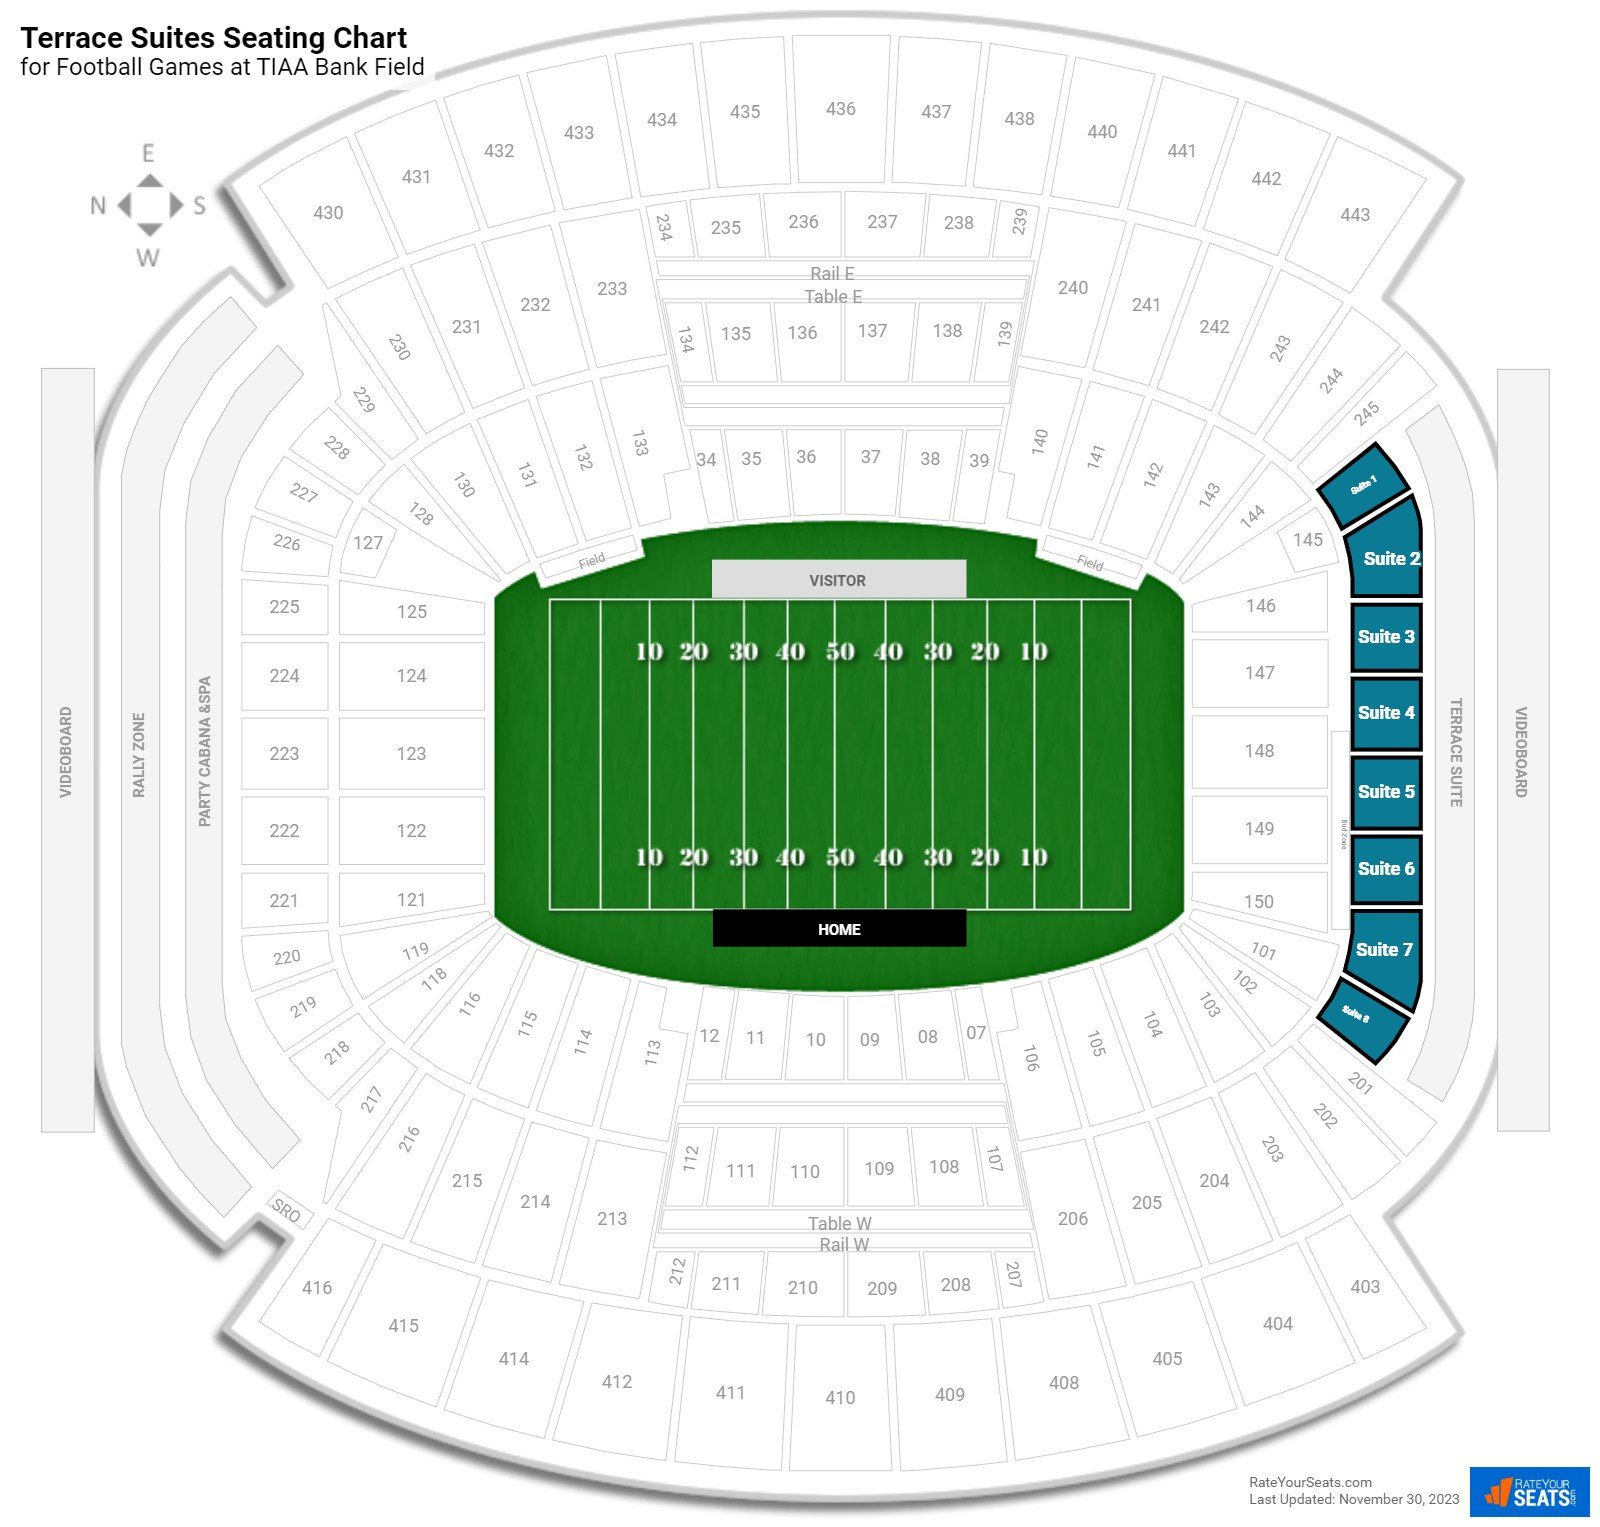 Football Terrace Suites Seating Chart at TIAA Bank Field